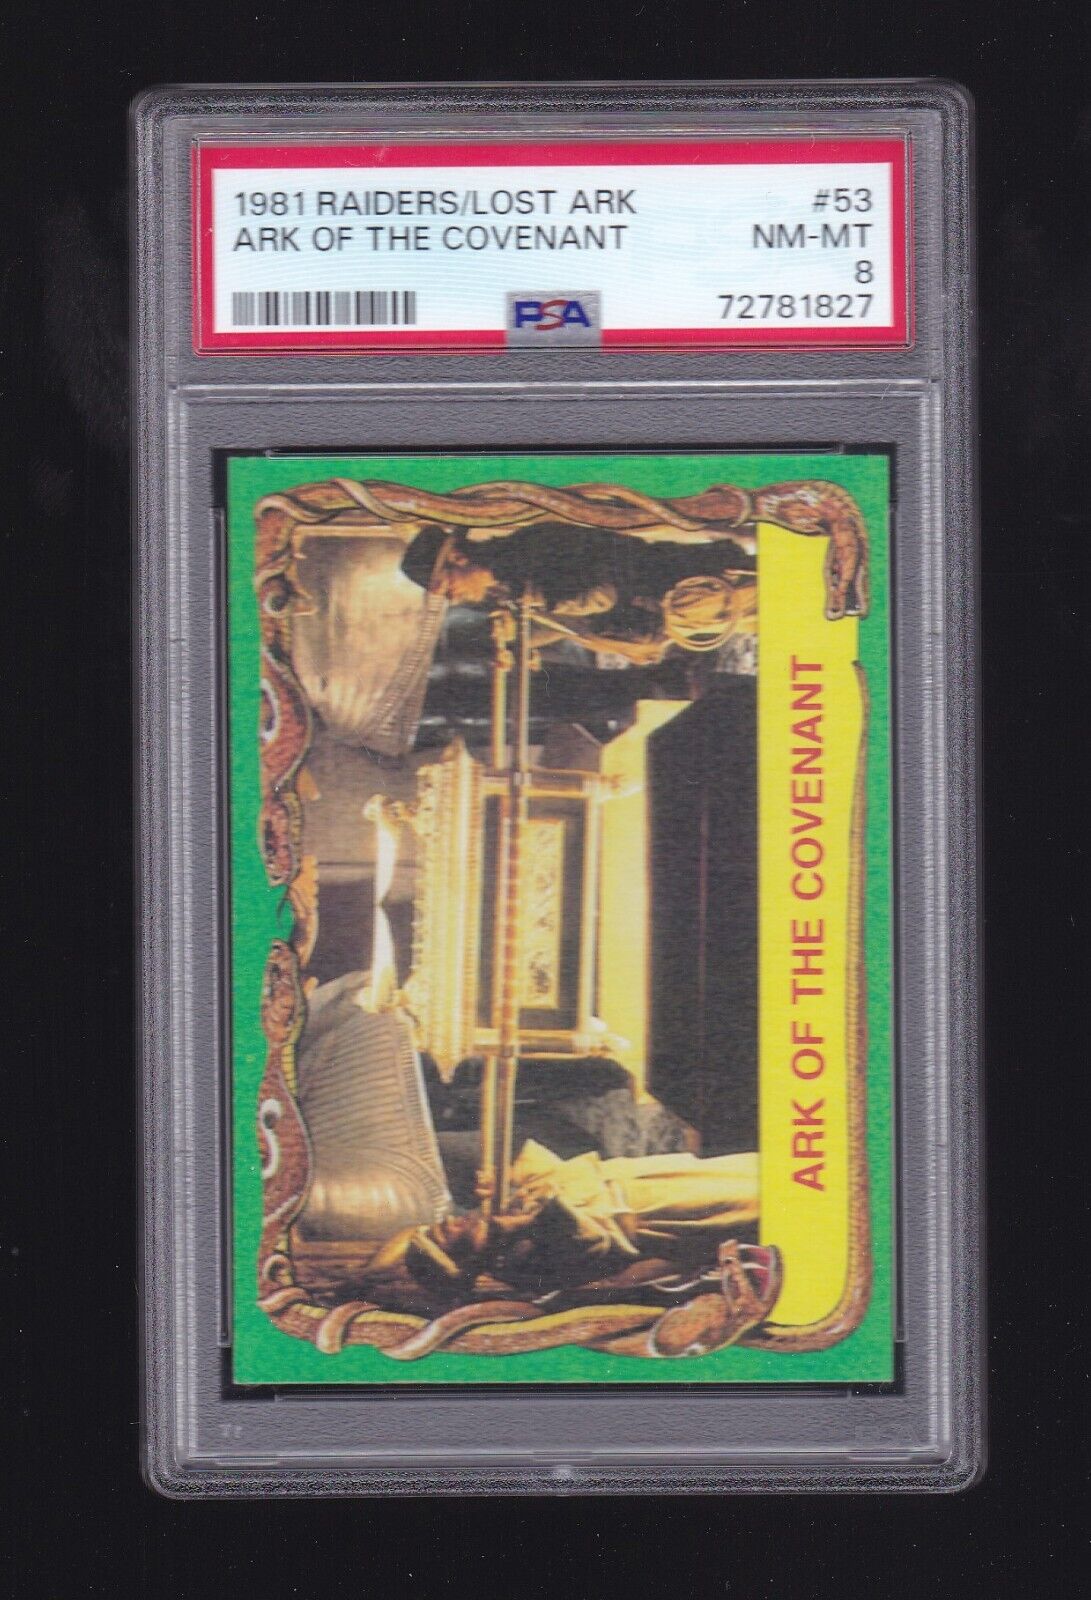 1981 Indiana Jones Raiders of the Lost Ark Ark of the Covenant #53 PSA 8